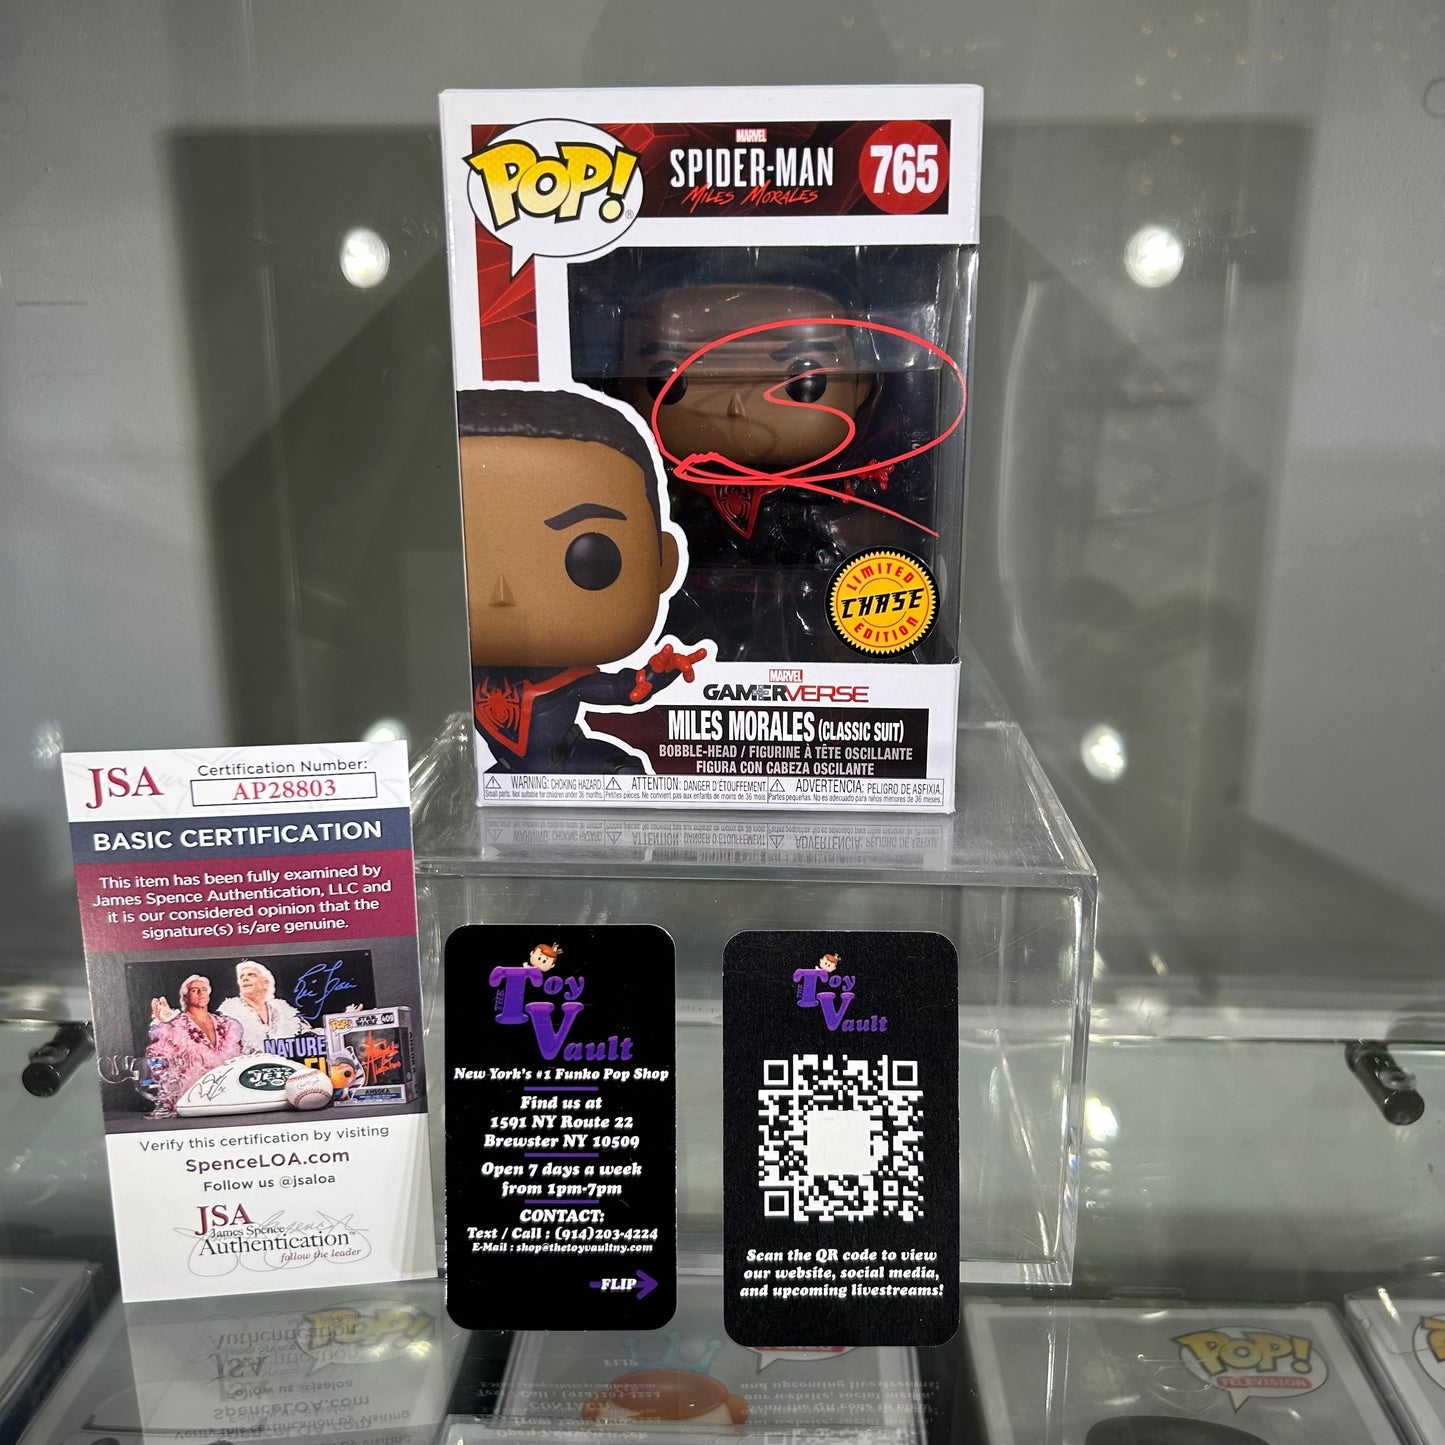 Funko Pop! Marvel Spider Man - Miles Morales (Classic Suit) #765 Unmasked CHASE Signed by Shameik Moore